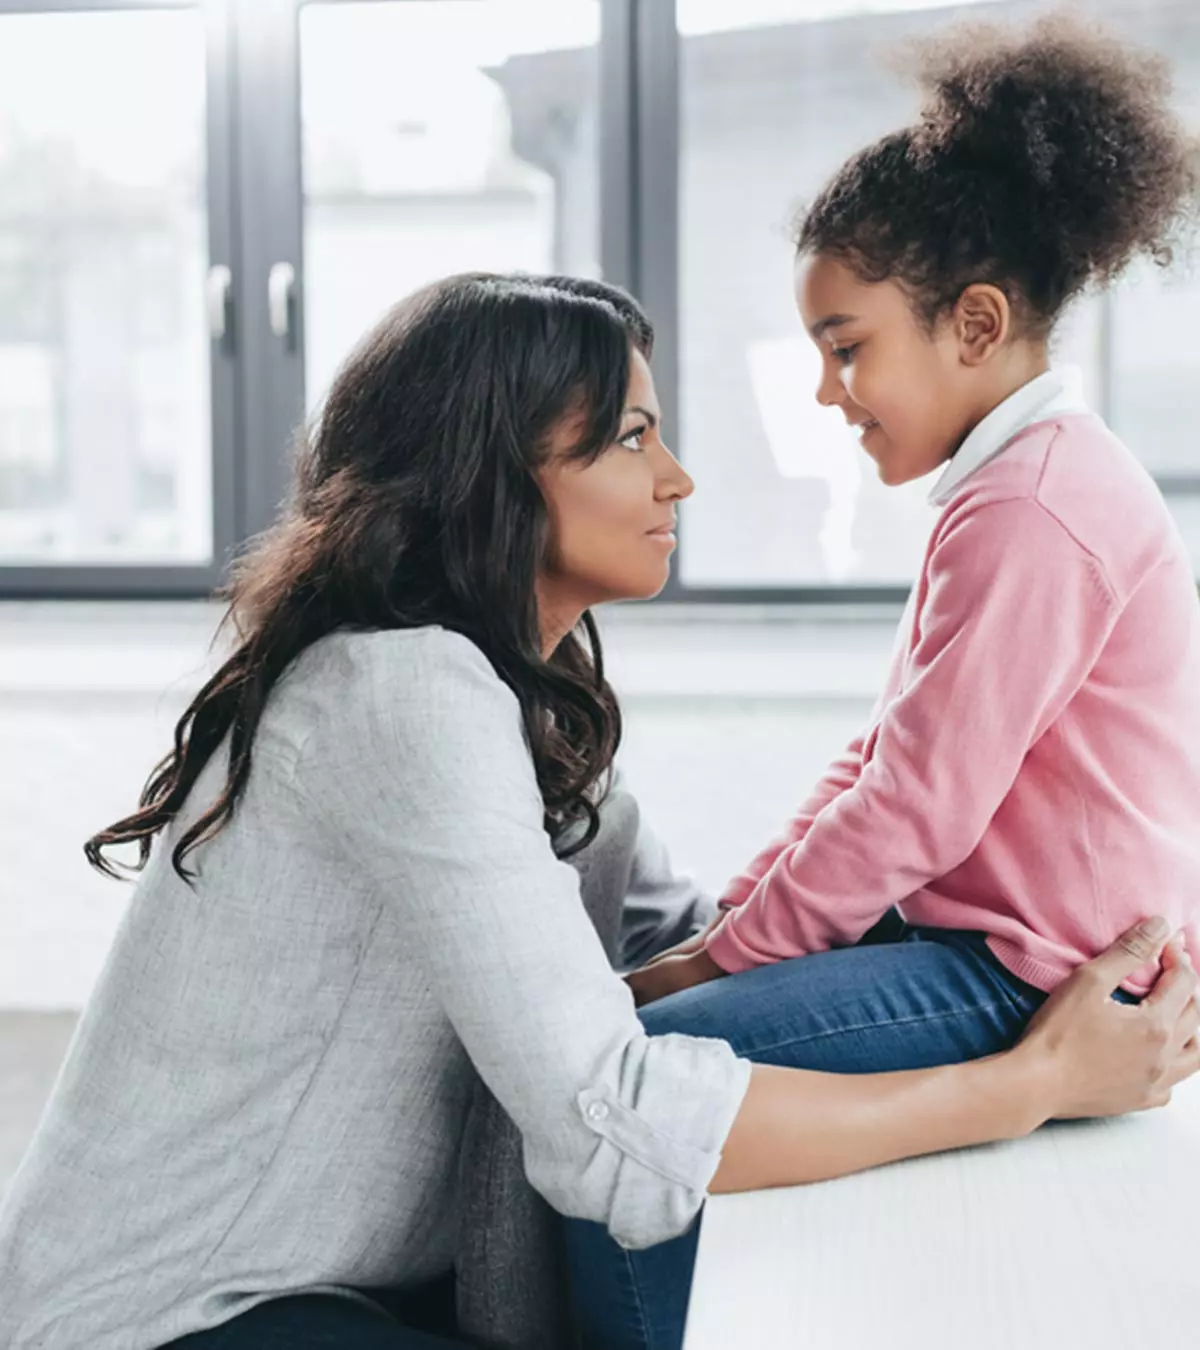 If you want your child to listen to you, it's worth knowing the right and effective ways to talk to them.